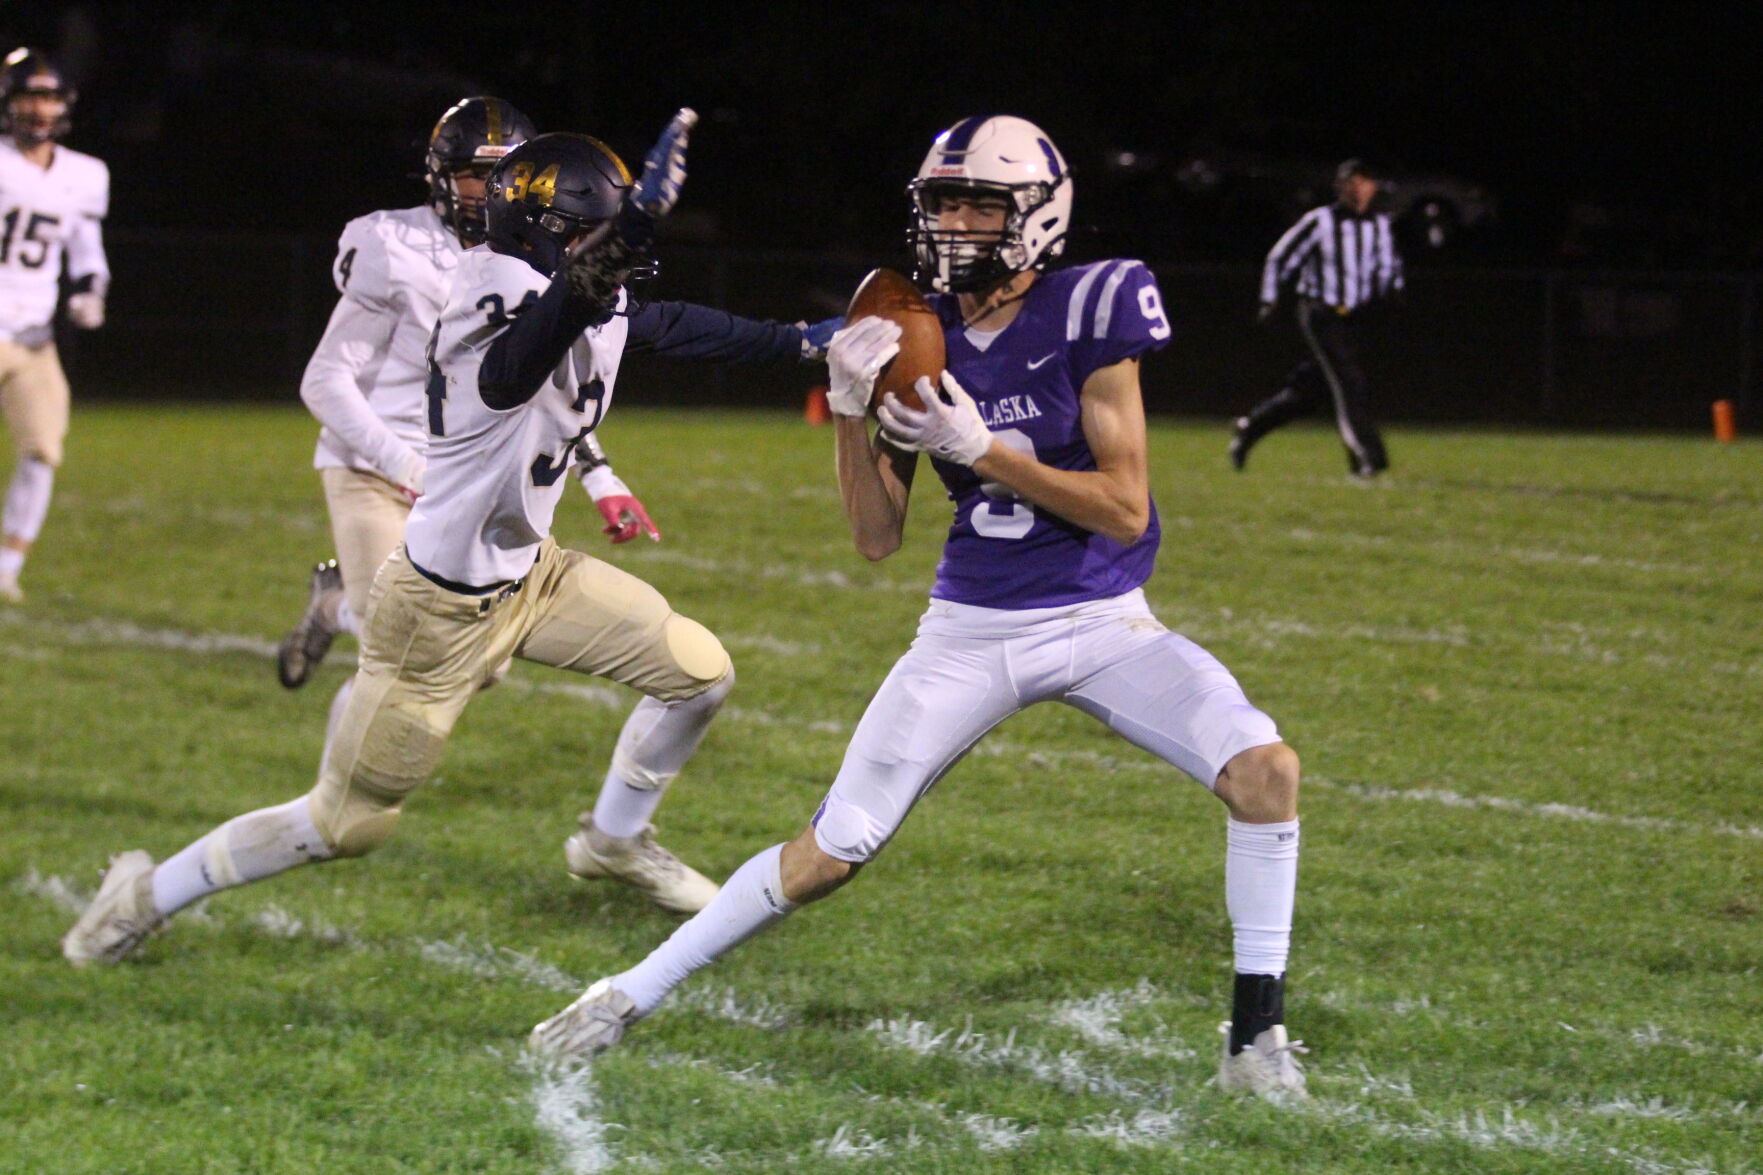 Waunakee Warriors, Holmen Vikings, and Central RiverHawks: Dominant Defense, Playoff Spot, and Heartbreaking Loss